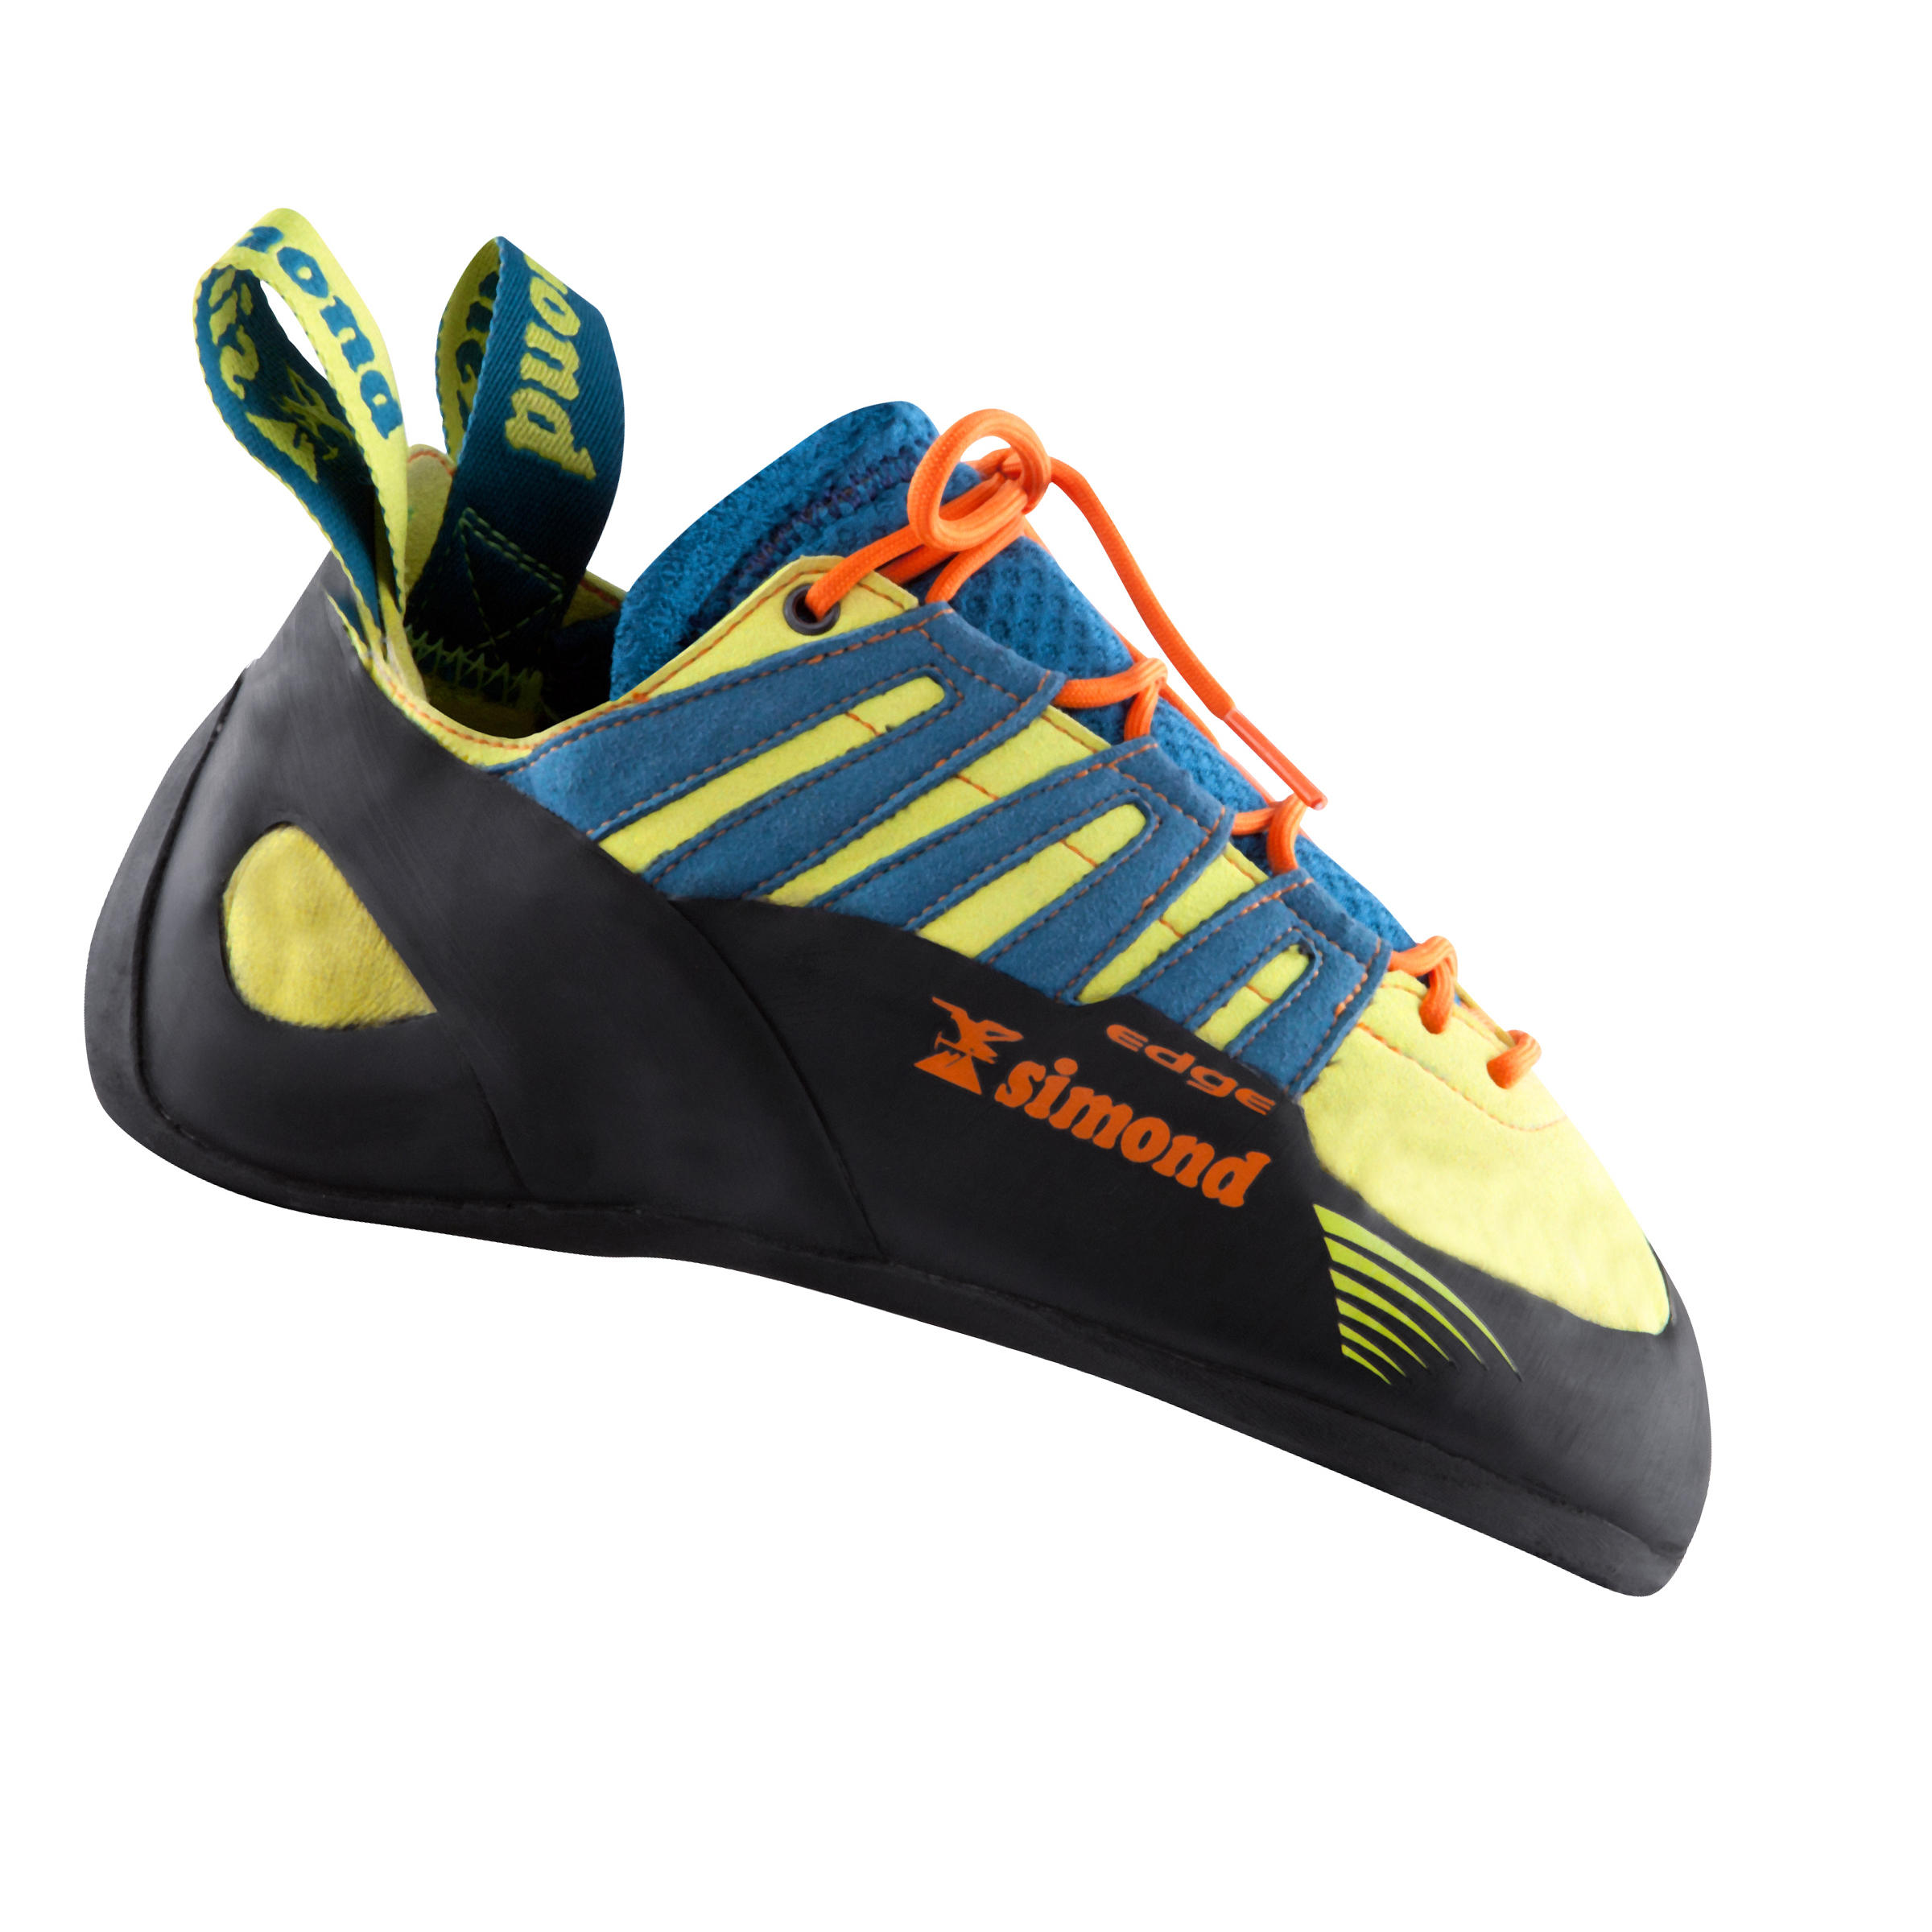 Rock climbing shoes for Advanced 